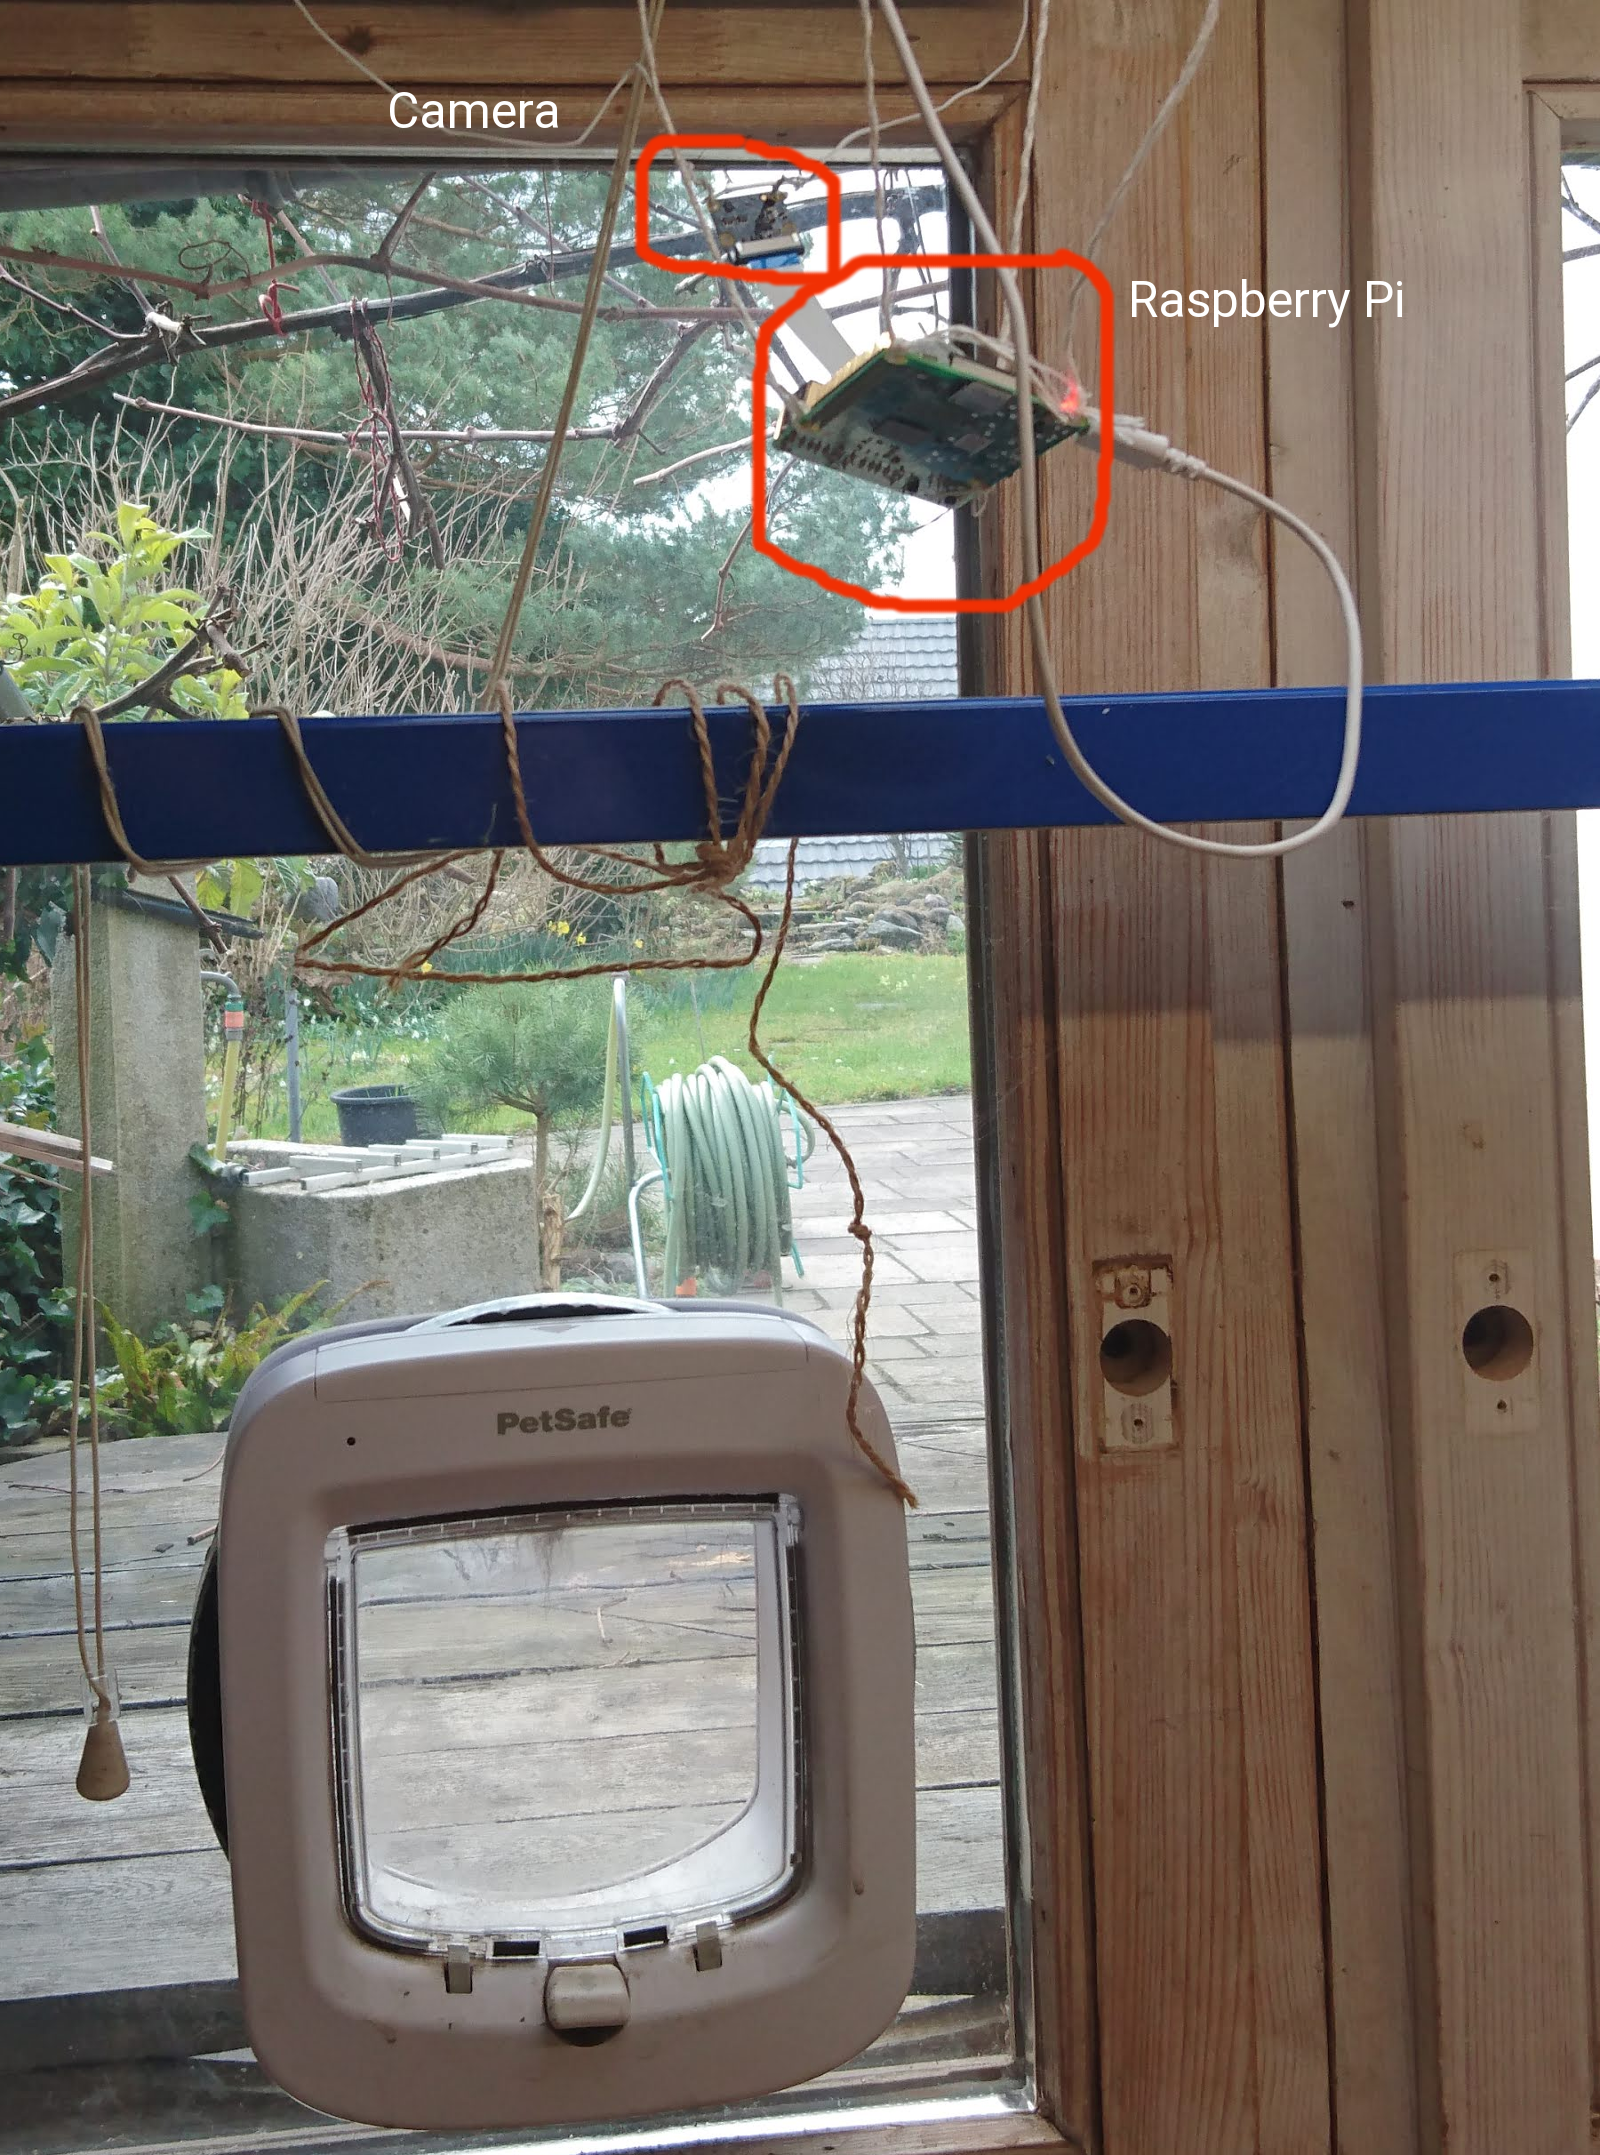 Raspberry Pi and Camera suspended above cat flap